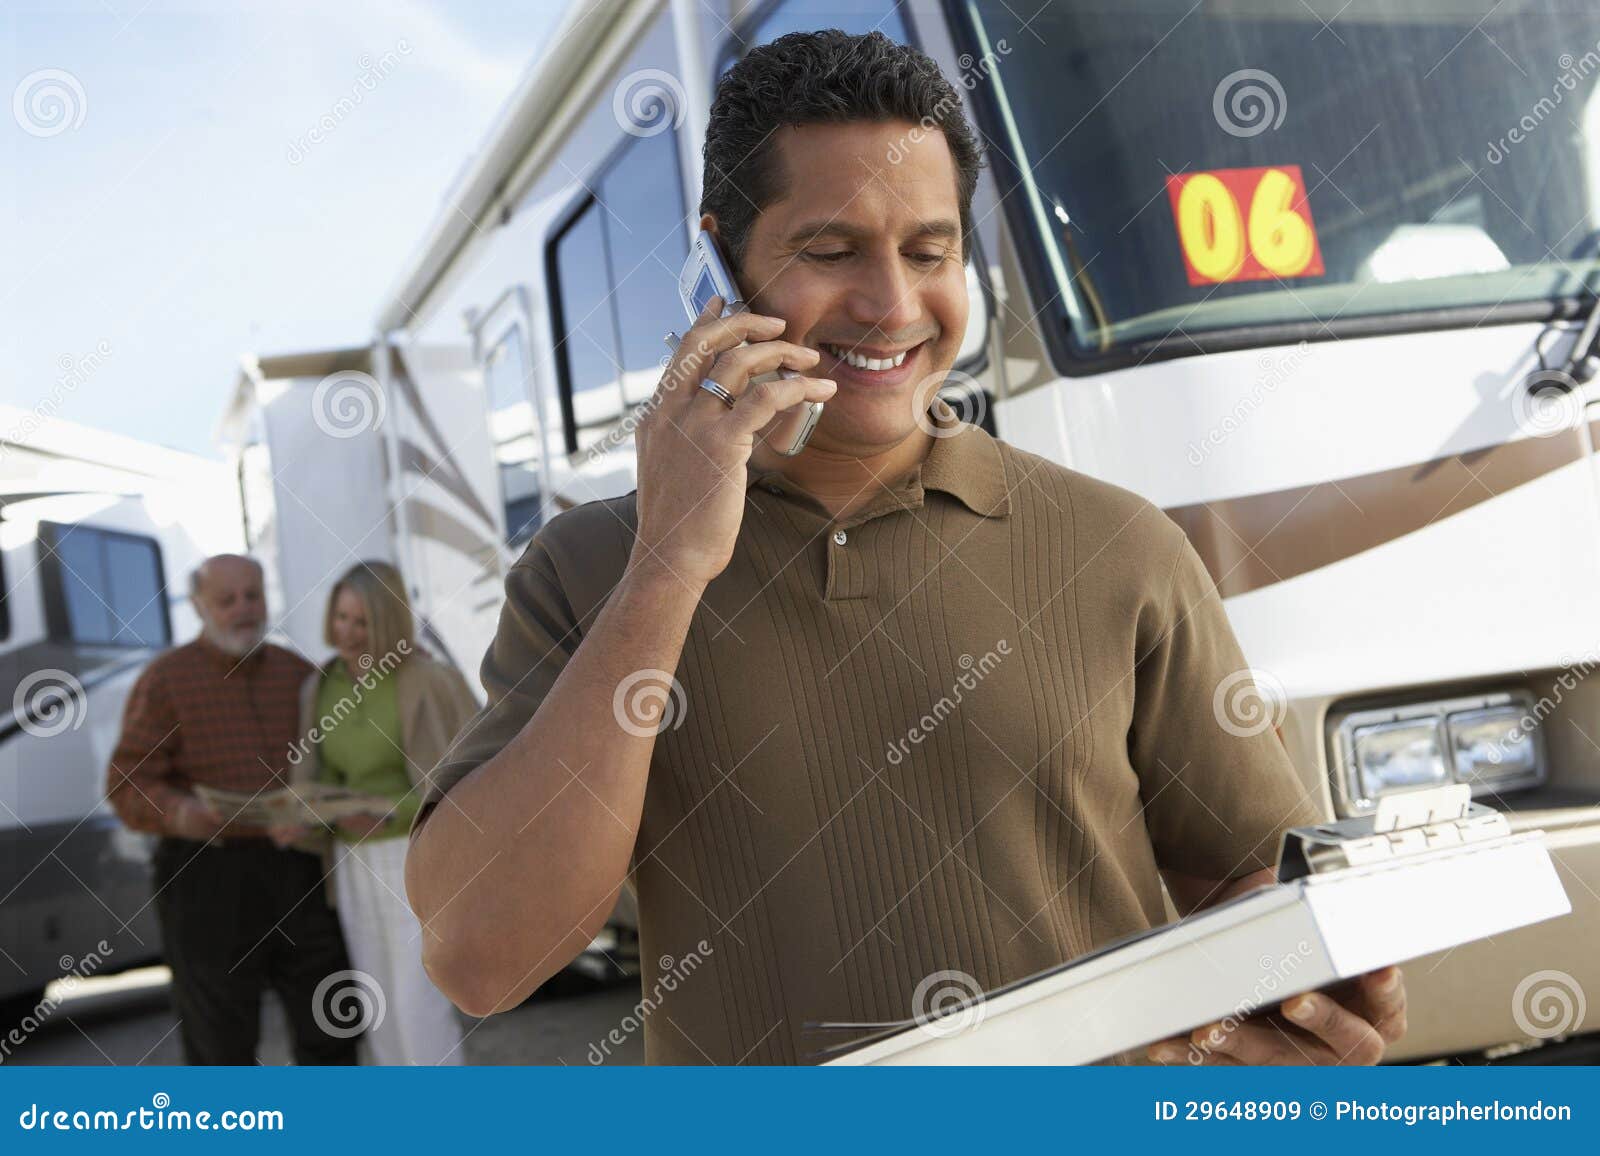 tourist guide talking on phone